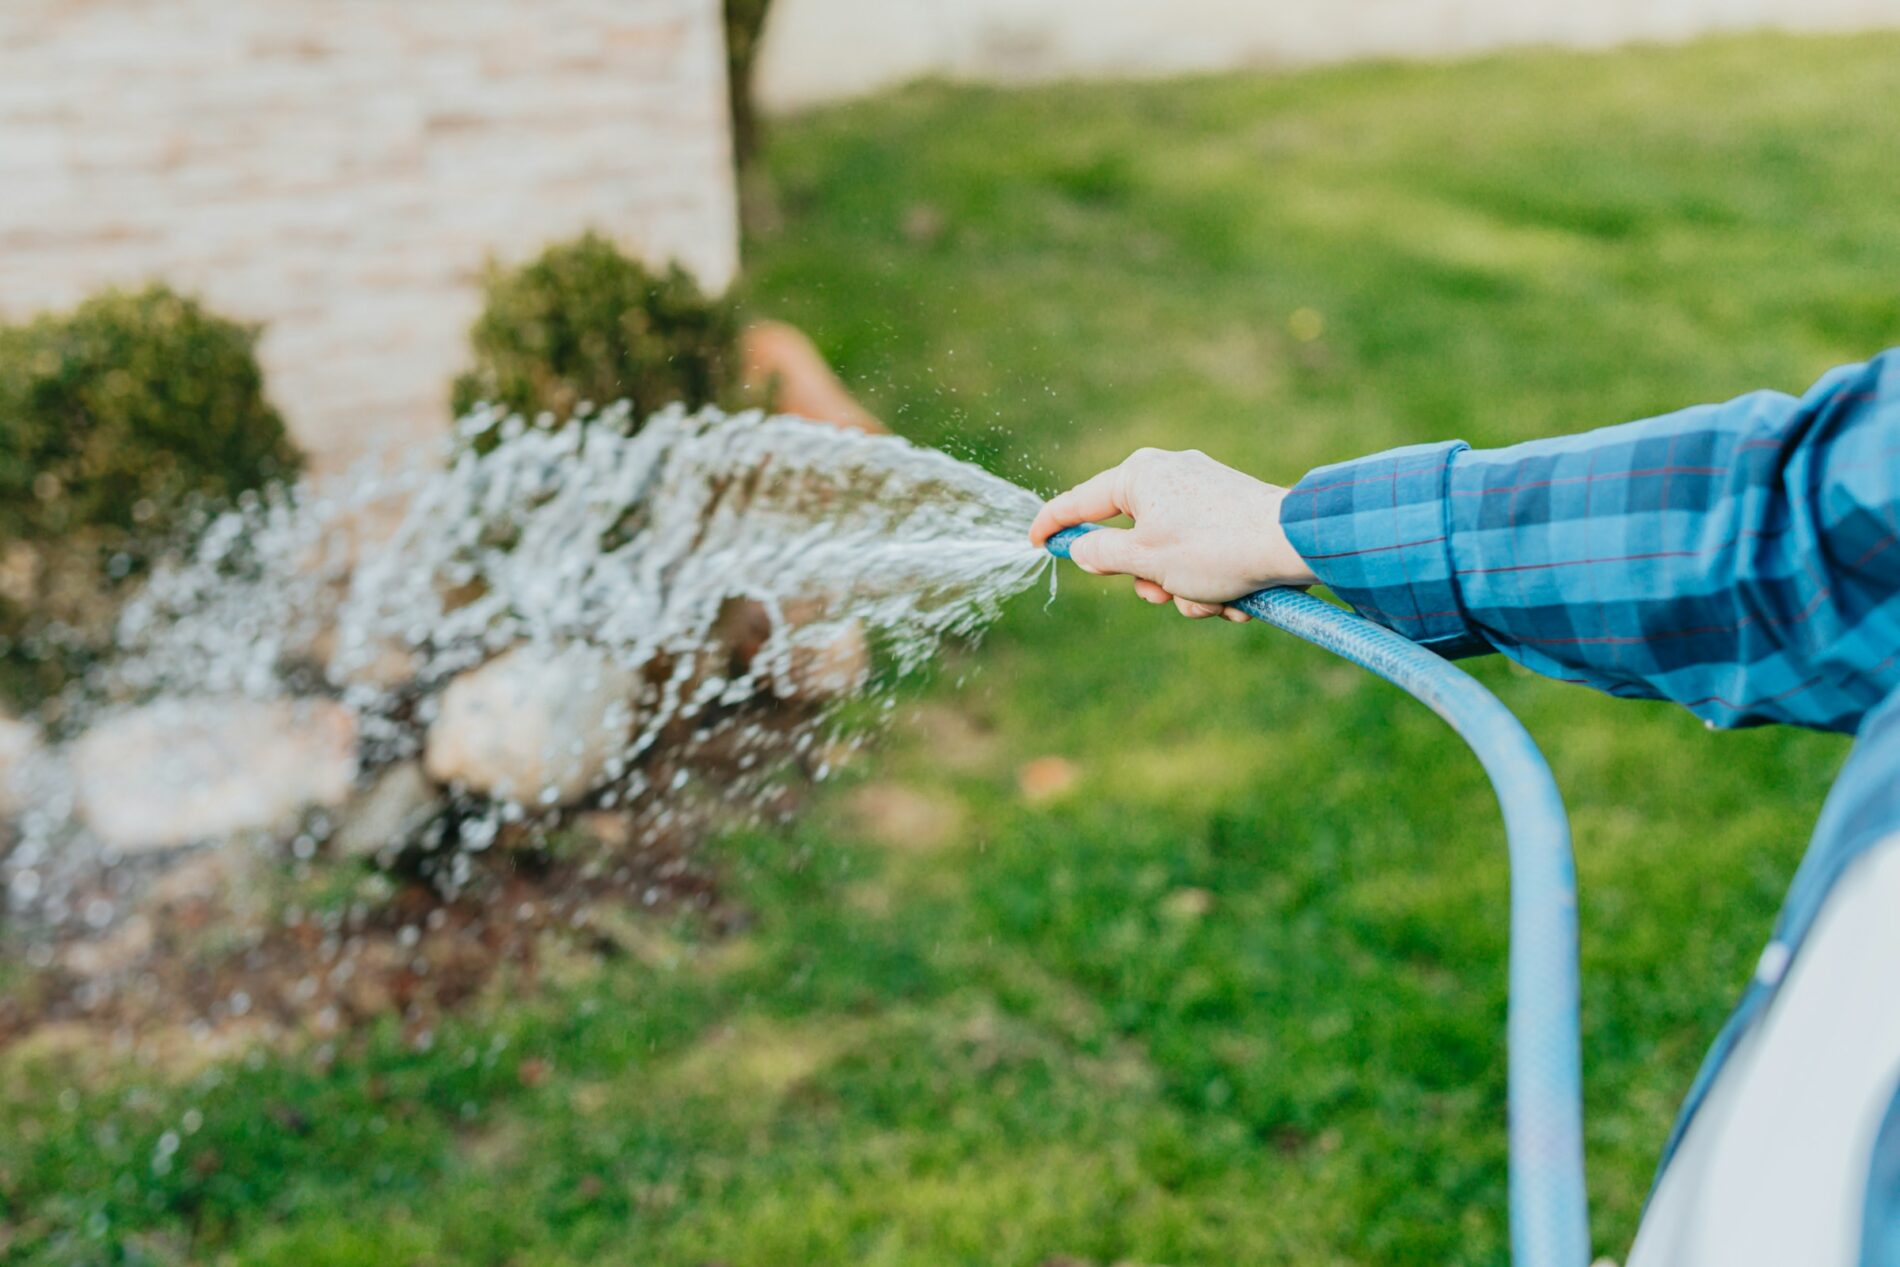 Person watering plants with a garden hose using EZ-FLO for fertigation and balancing nutrients.